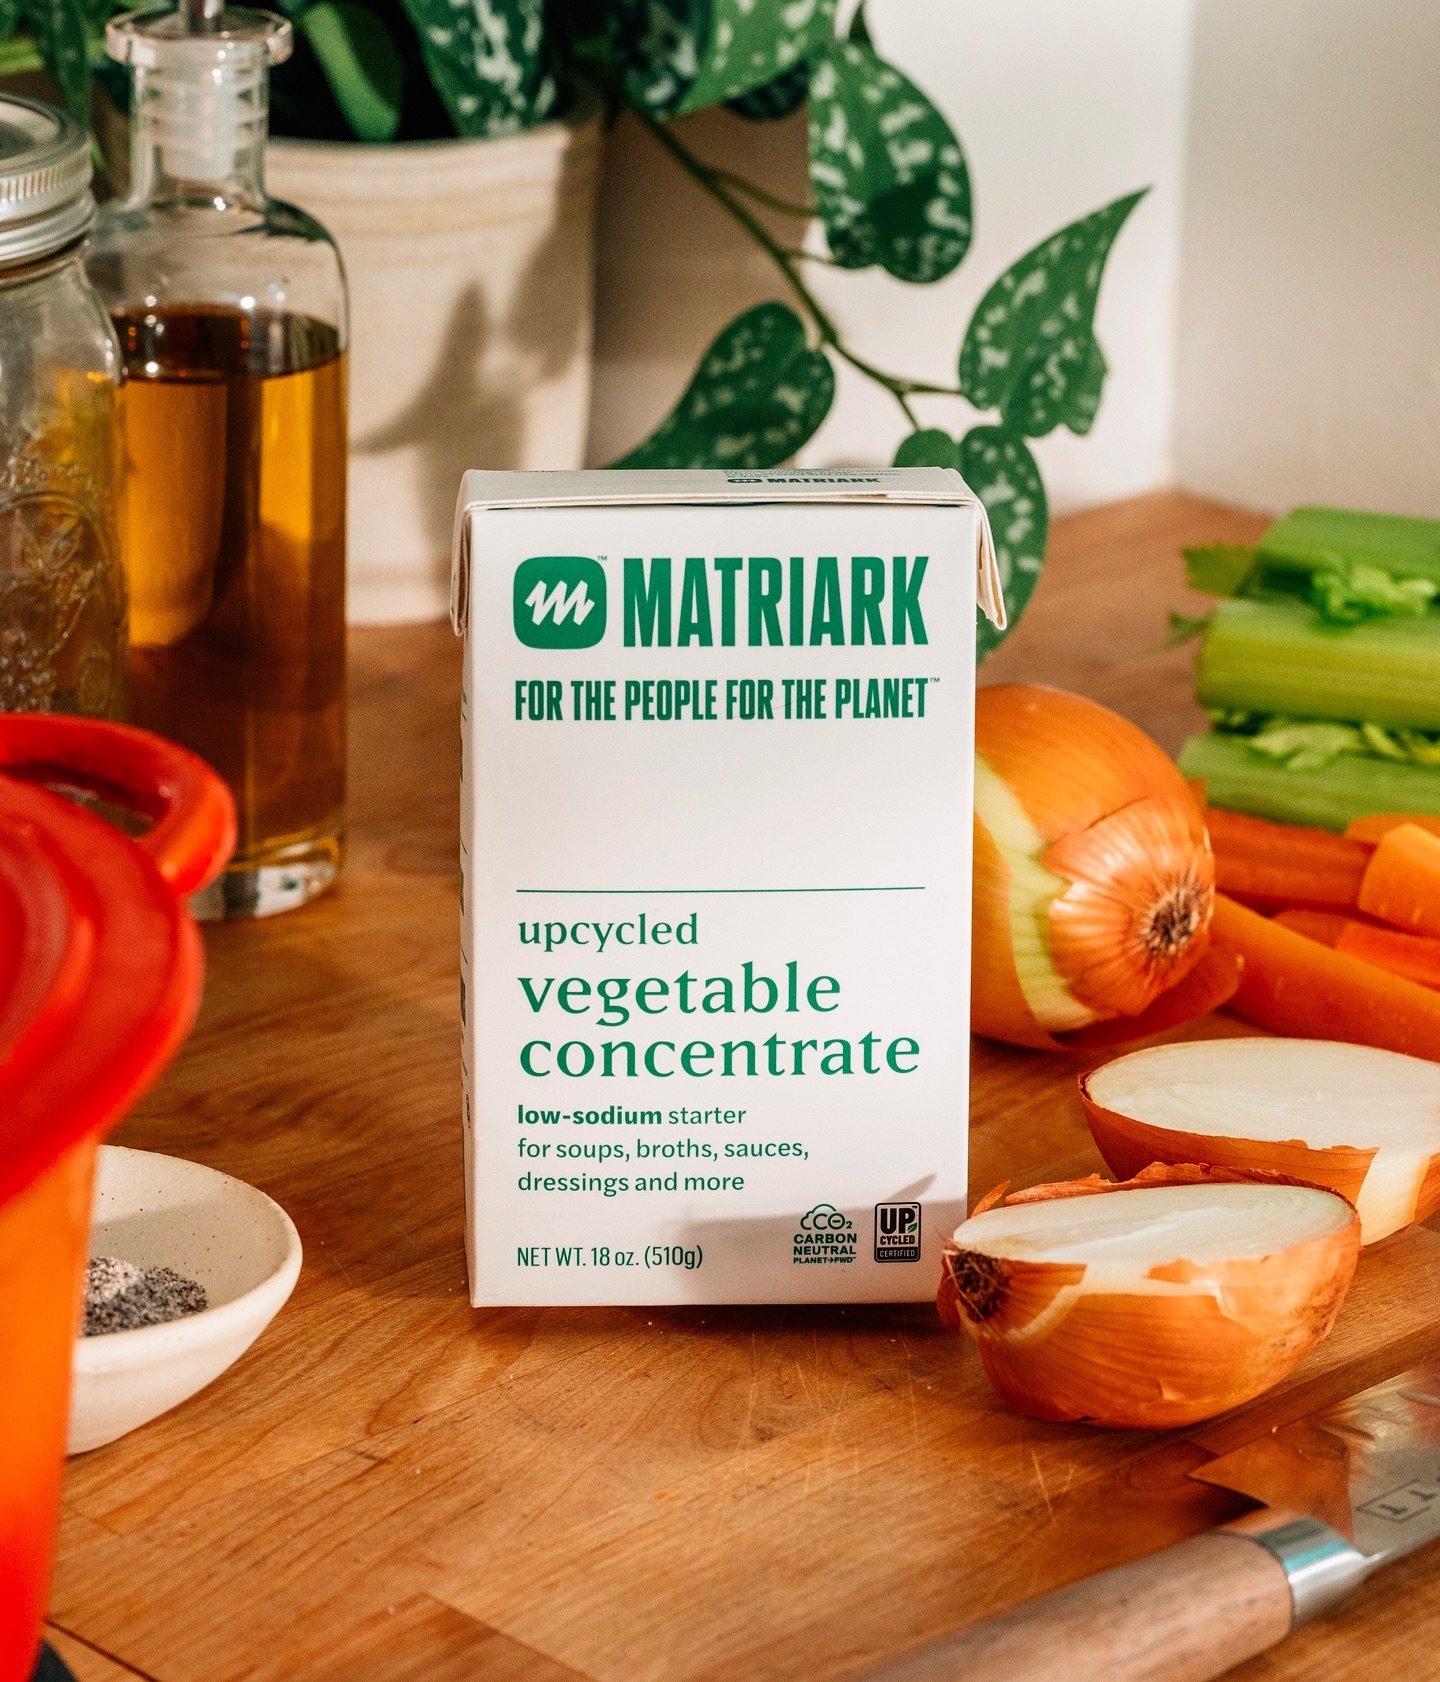 In honor of #stopfoodwasteday we&rsquo;re highlighting our Upcycled Vegetable Concentrate, a clean &amp; delicious alternative to traditional high-sodium vegetable broth concentrates. An all around flavor enhancer for rich umami, we like to call it t